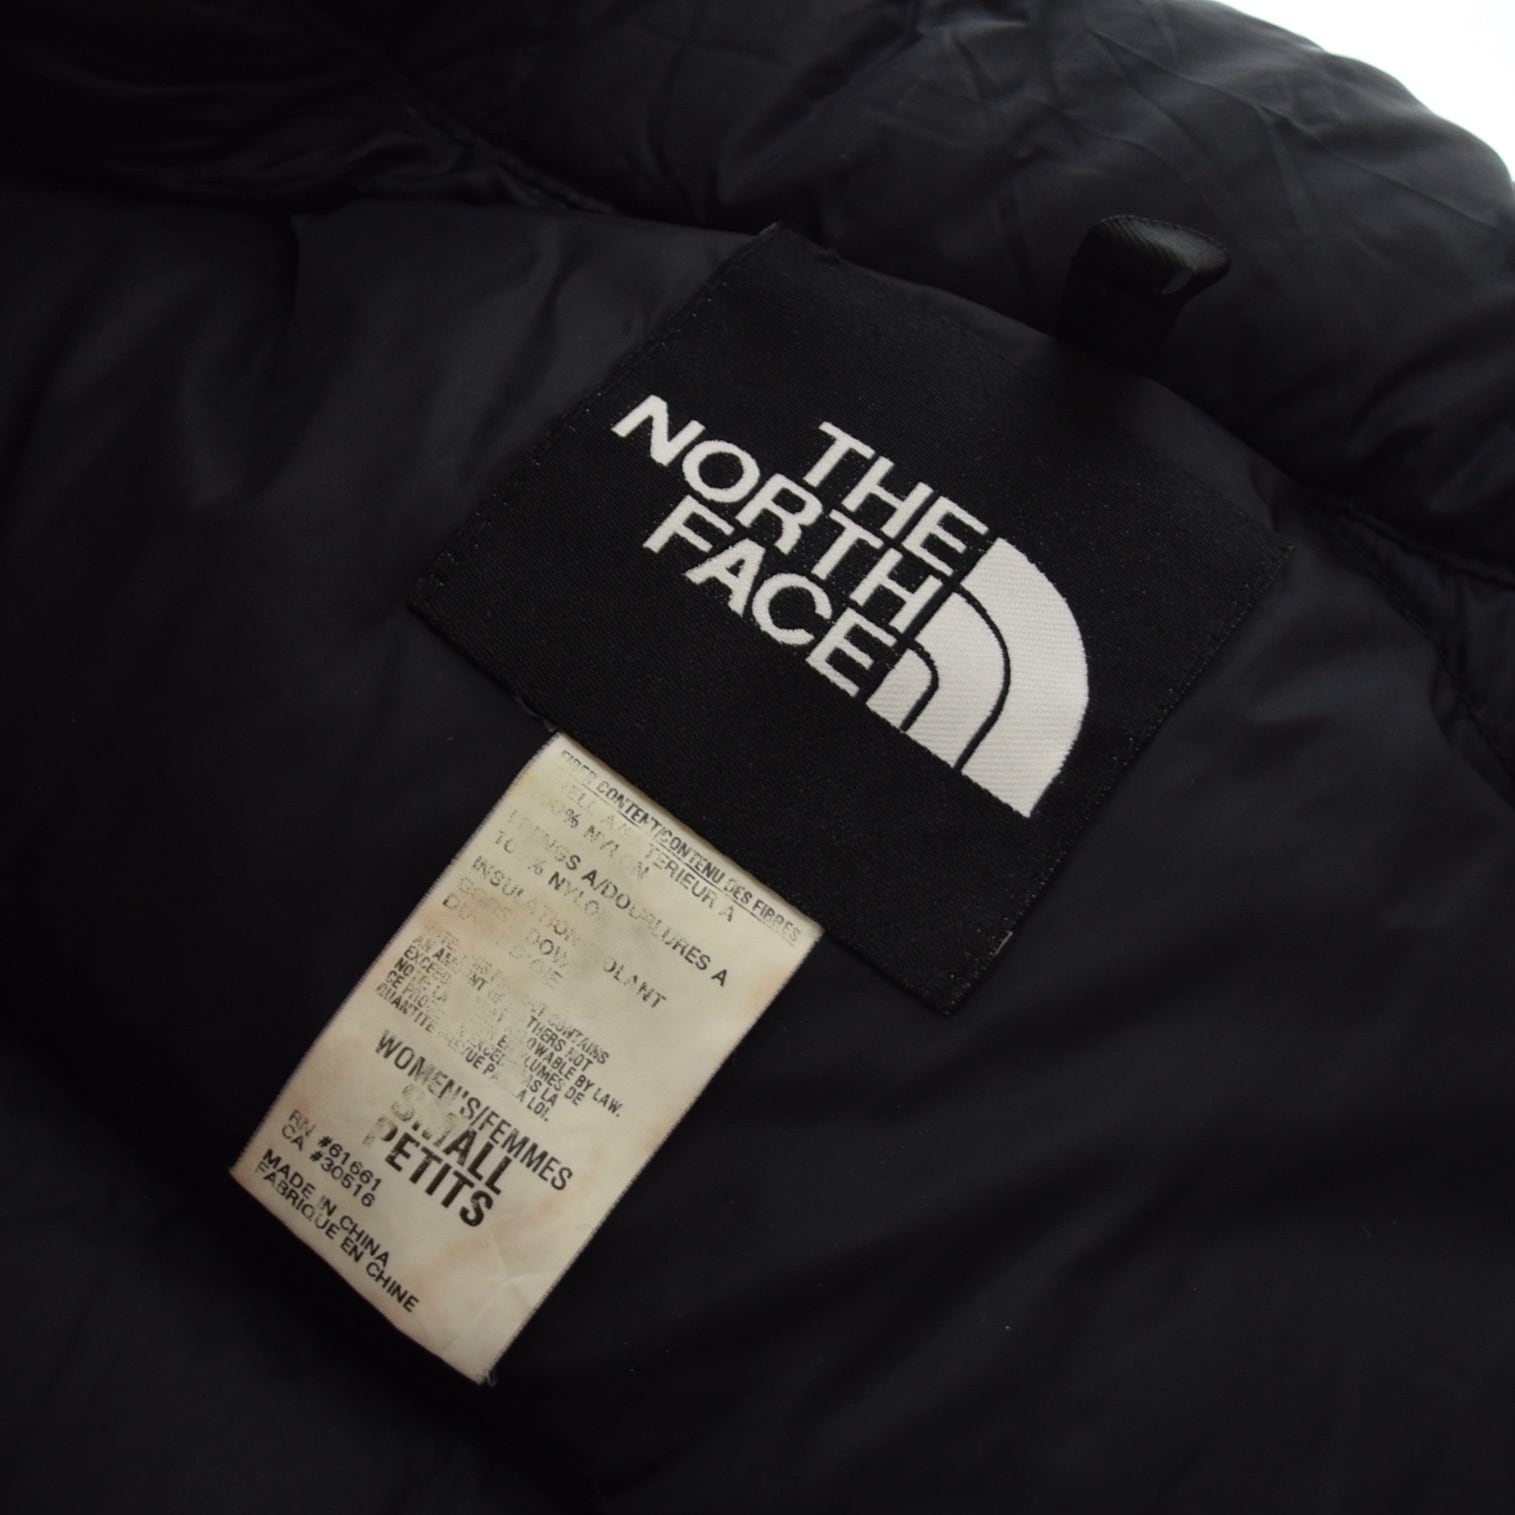 's "THE NORTH FACE" Vintage Nupste Down Vest / 年代 ノース